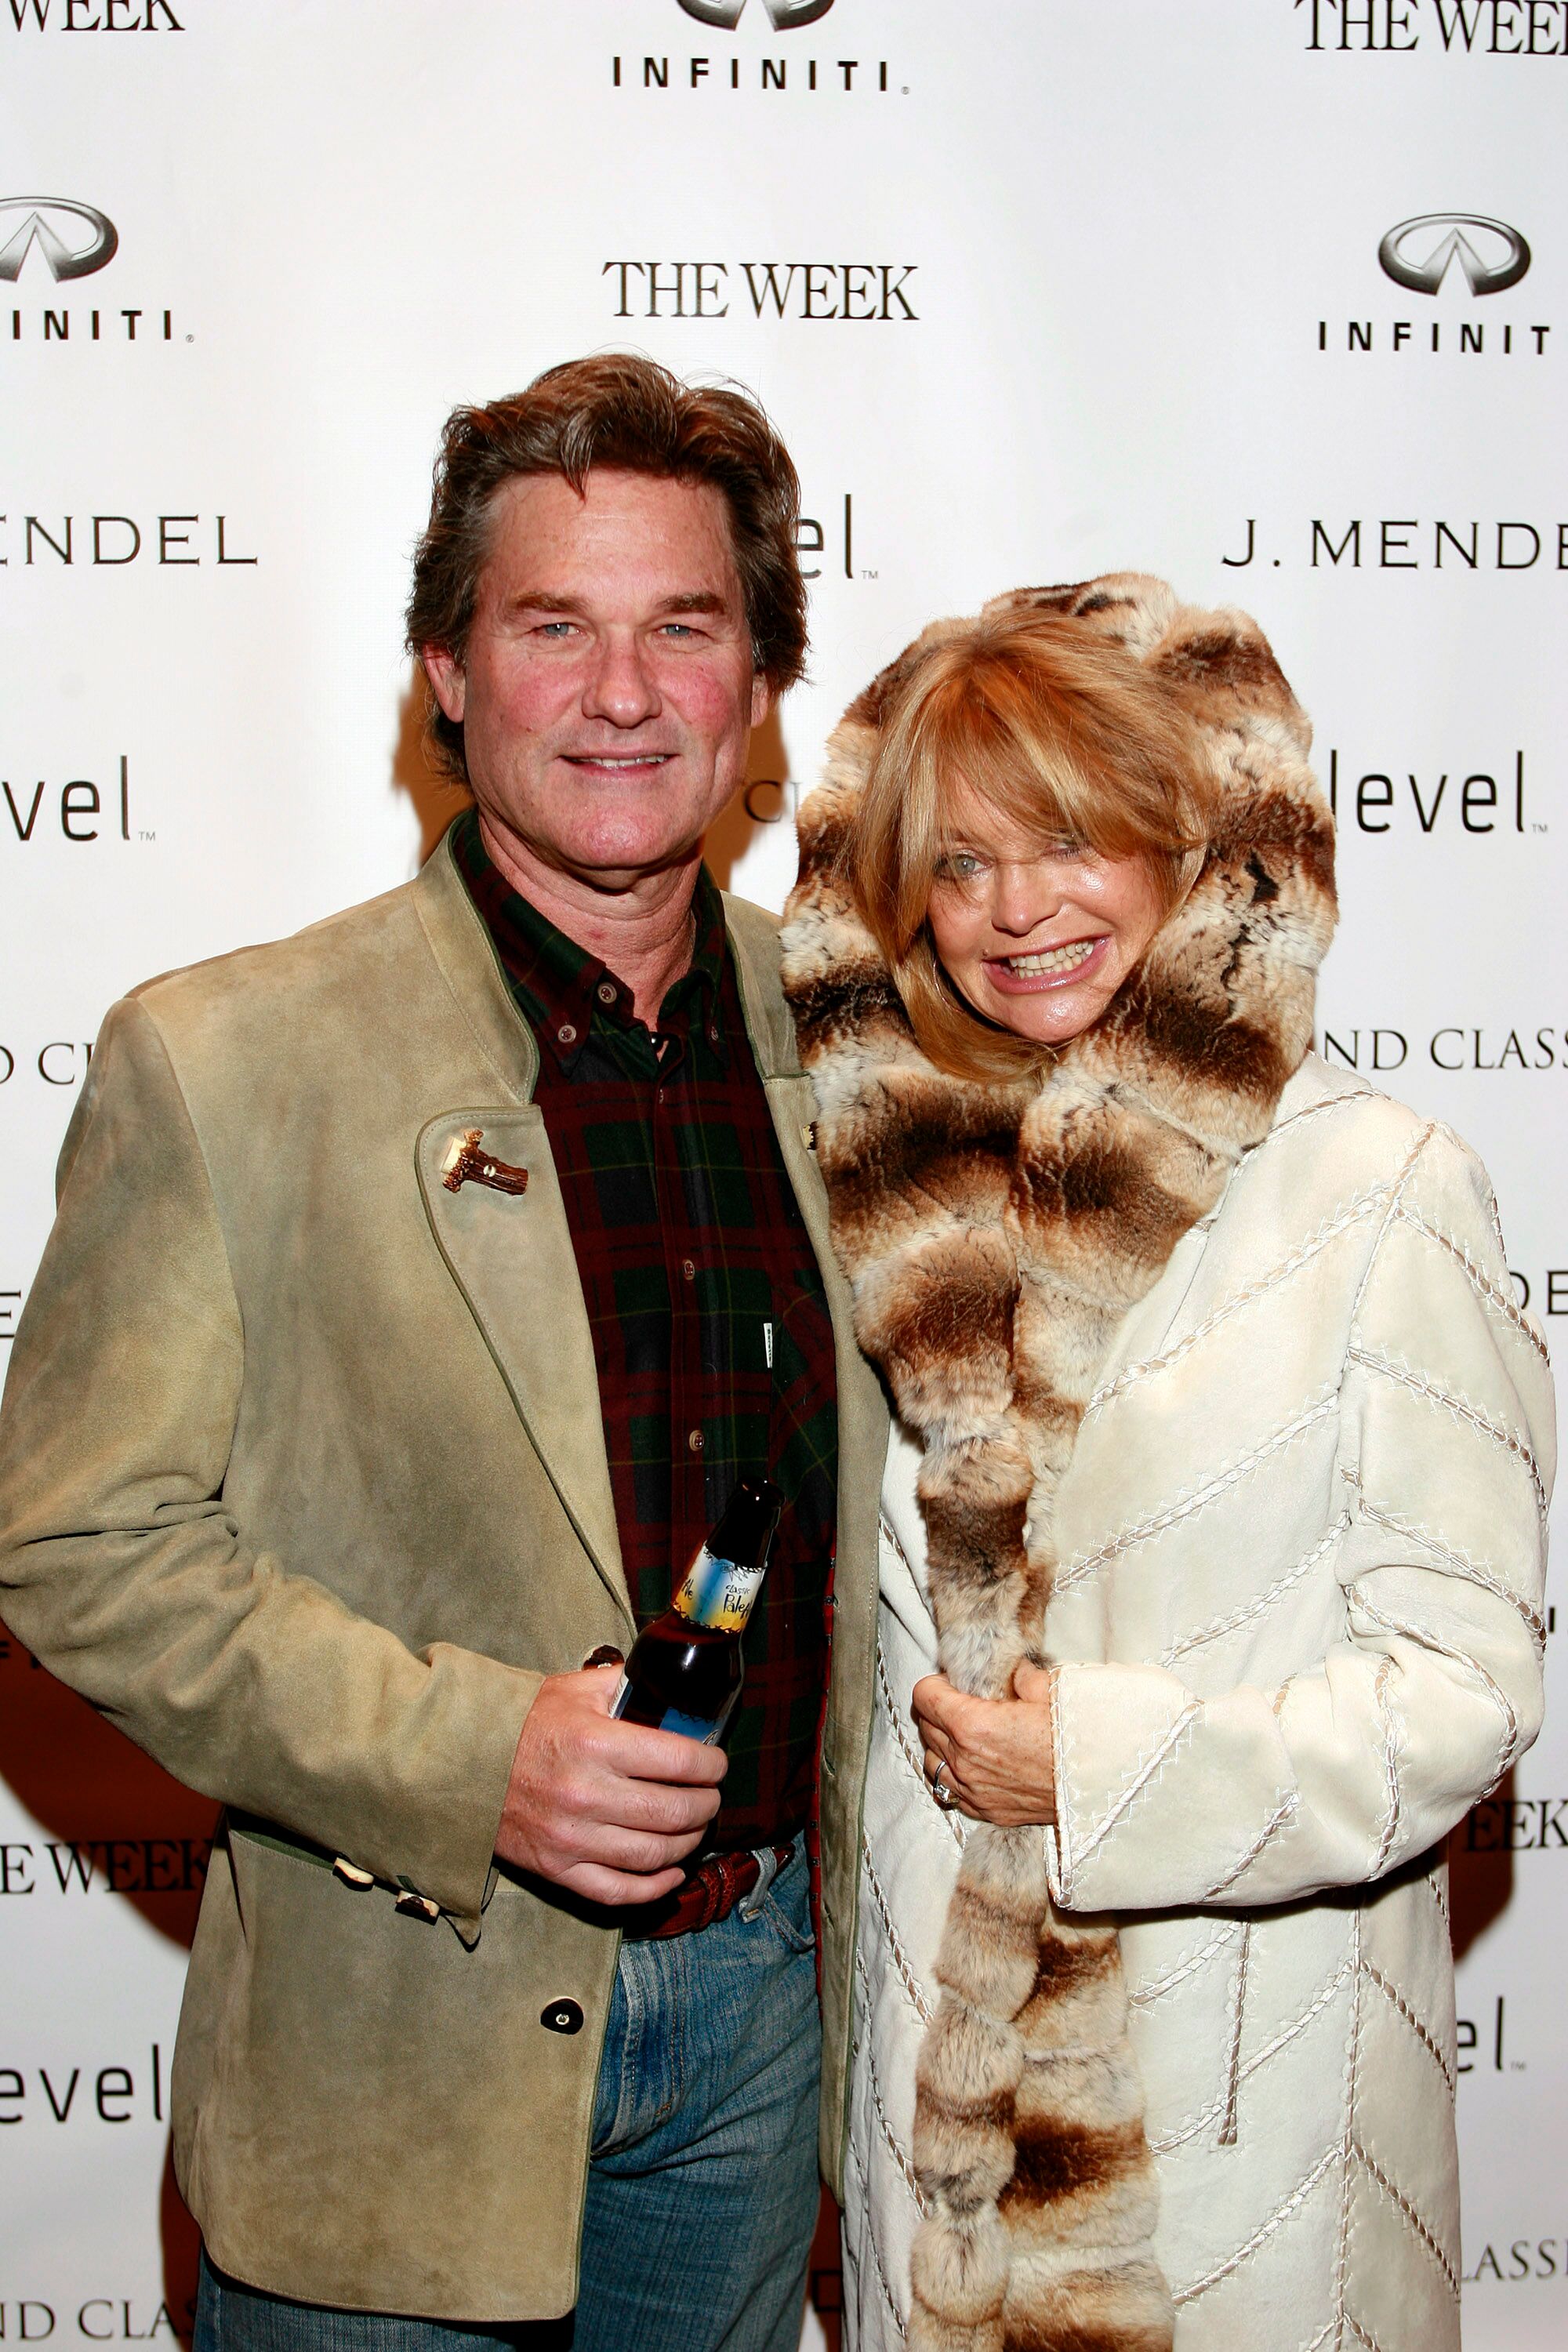 Kurt Russell and actress Goldie Hawn attend the screening of "To Kill a Mockingbird" presented by The Week, J. Mendel and Infinity at The Wheeler Opera House  | Getty Images